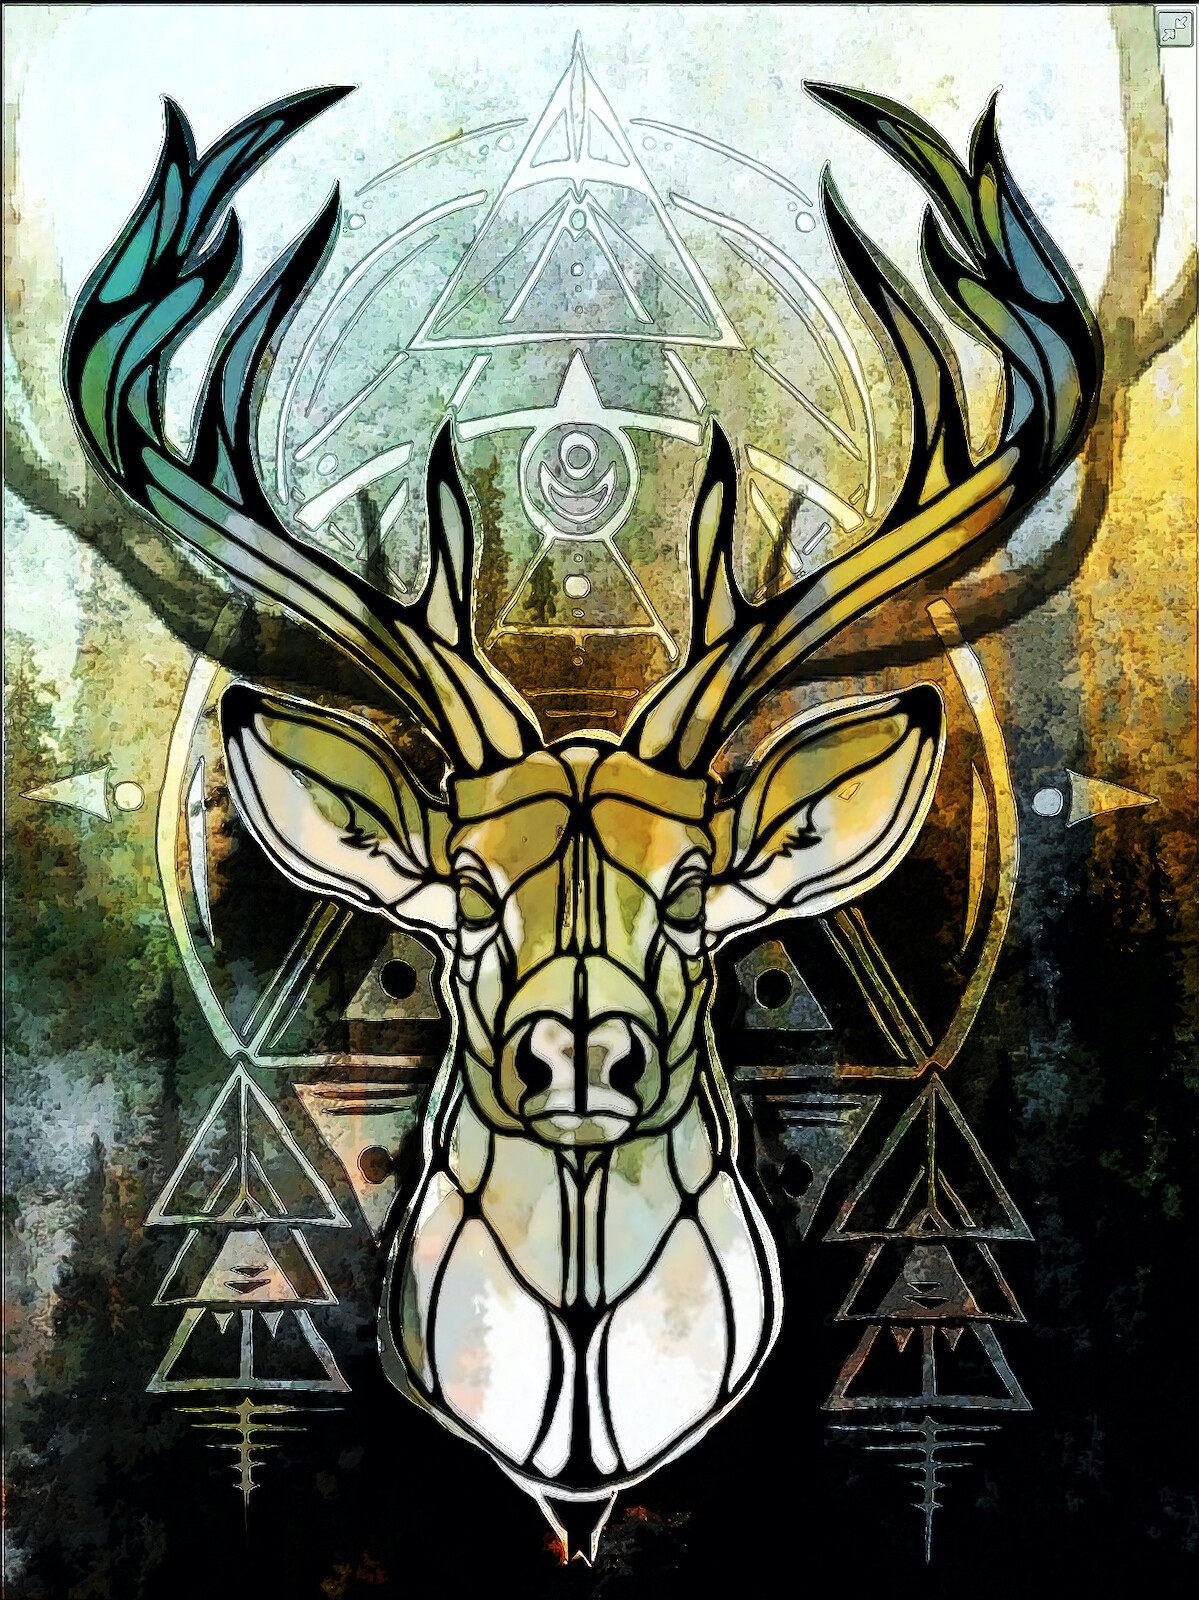 Mystic Deer created for a Prosthetic Leg by INKHOUSE Design Studios